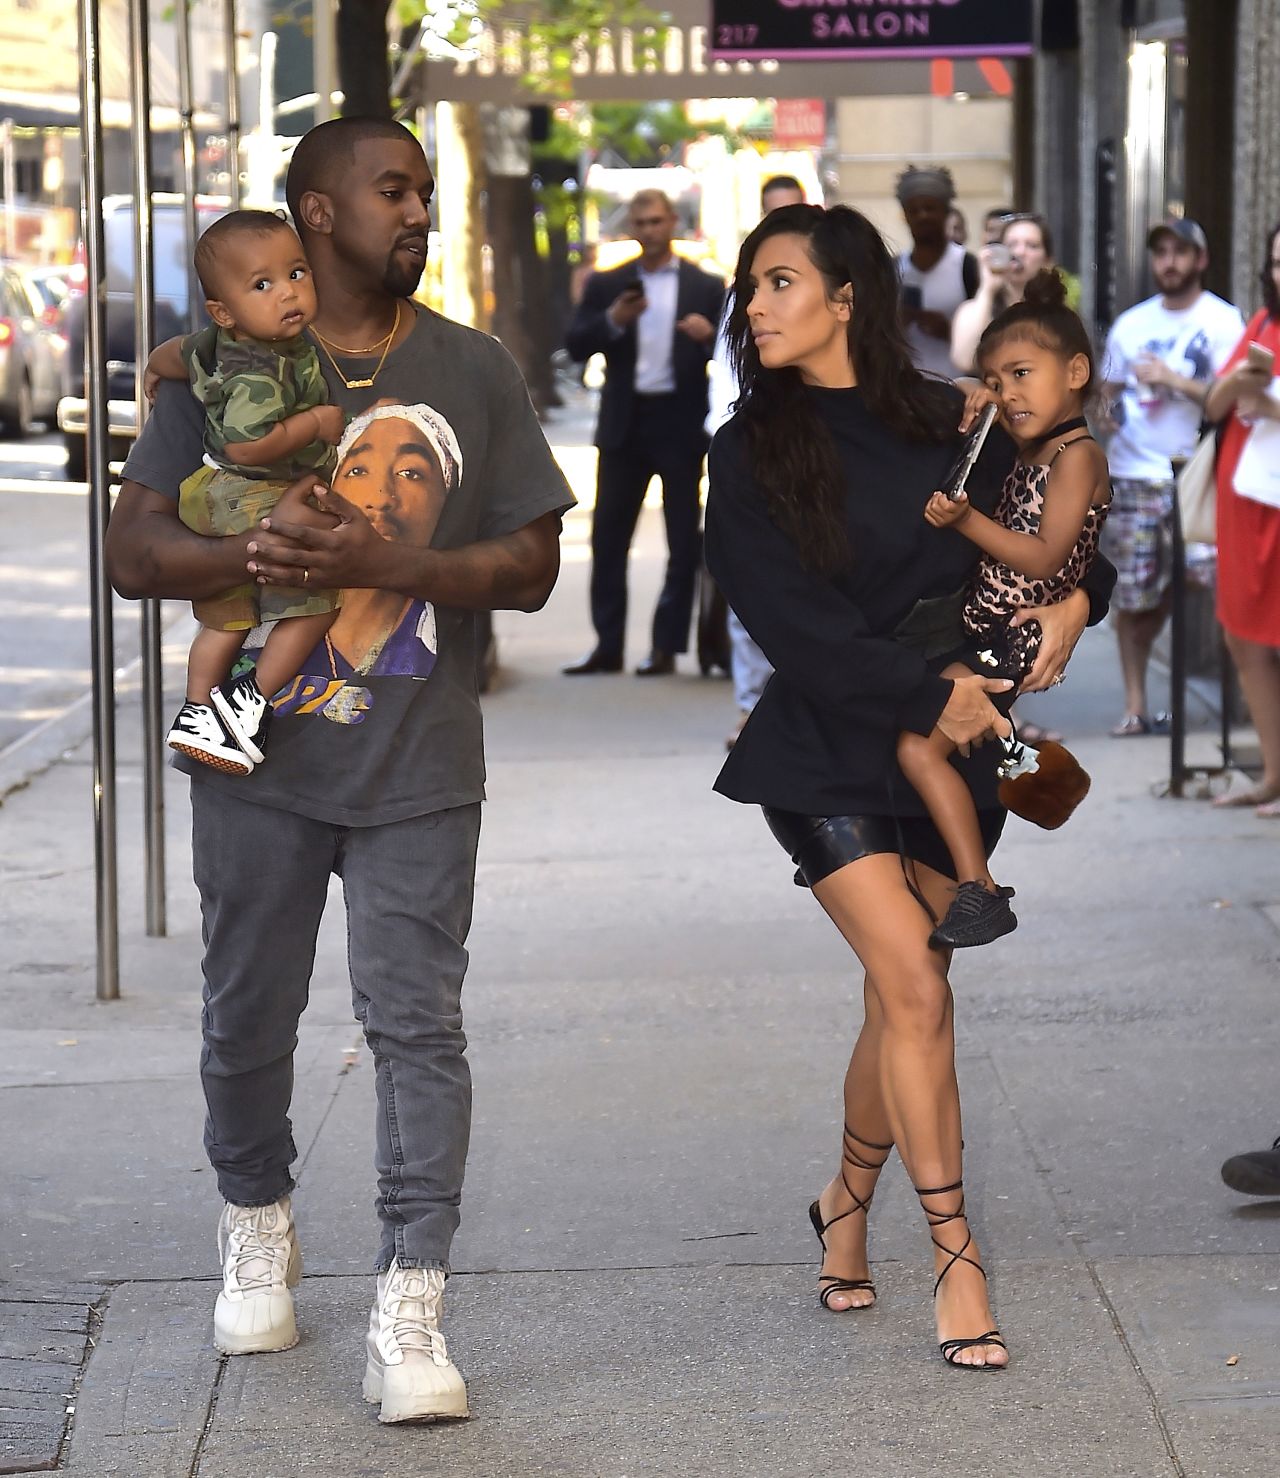 Kanye holds their son Saint and Kim holds North as they walk in New York in August 2016.